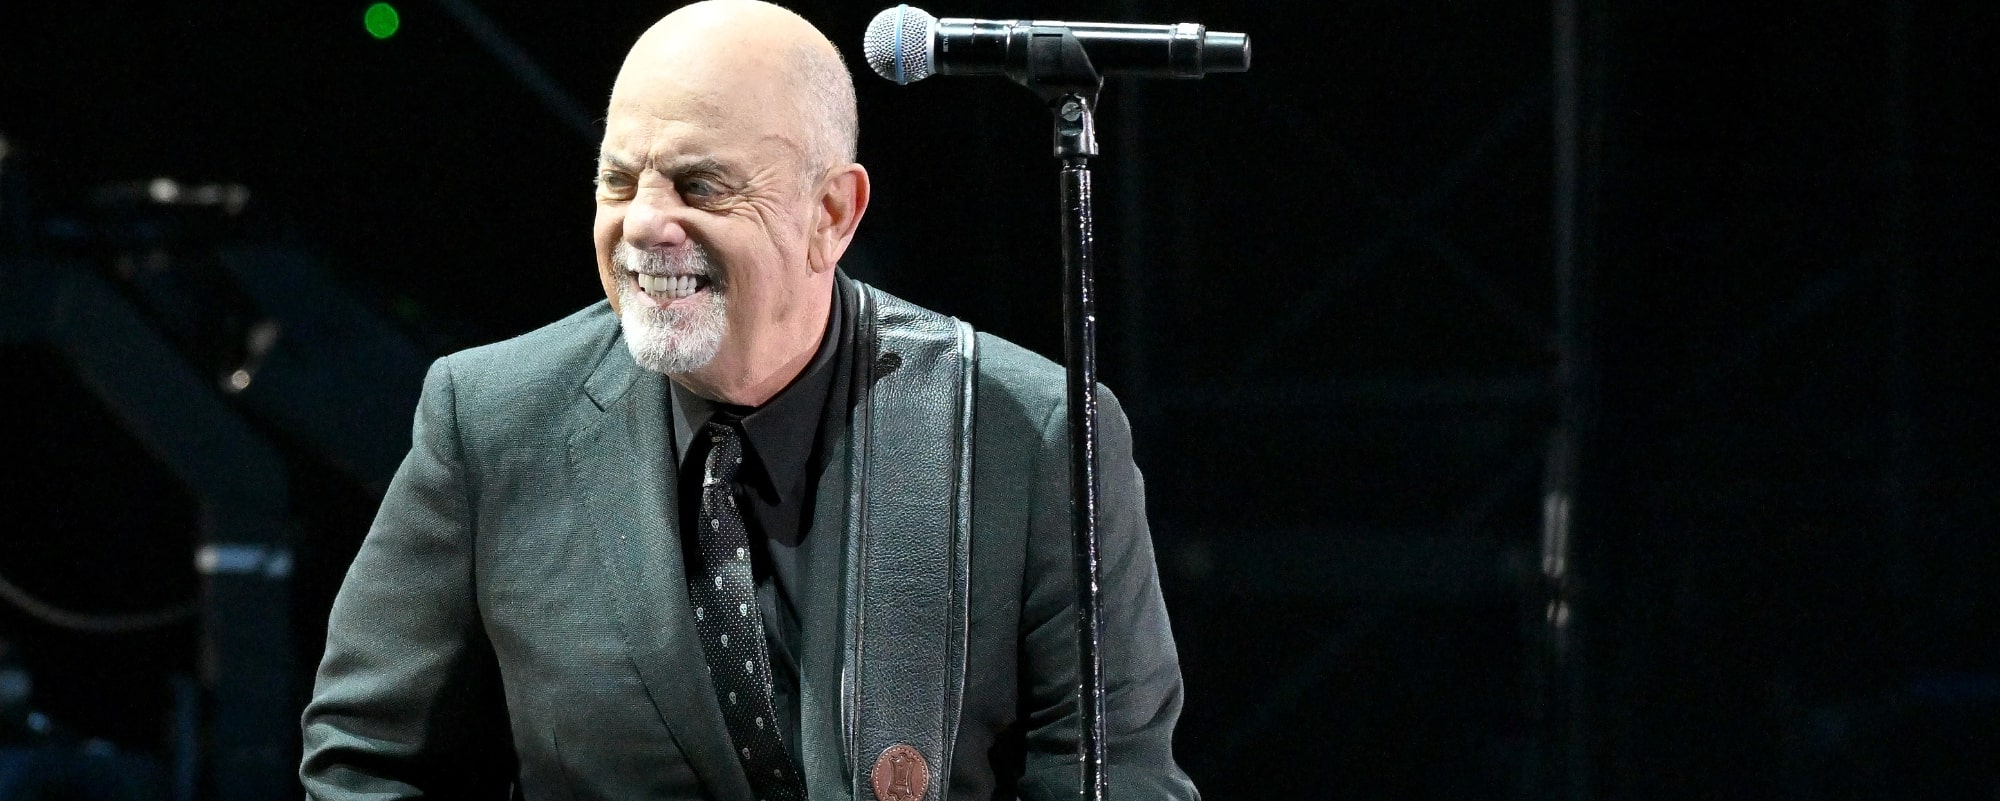 Watch Billy Joel’s First GRAMMYs Performance in 30 Years With New Single “Turn the Lights Back On”